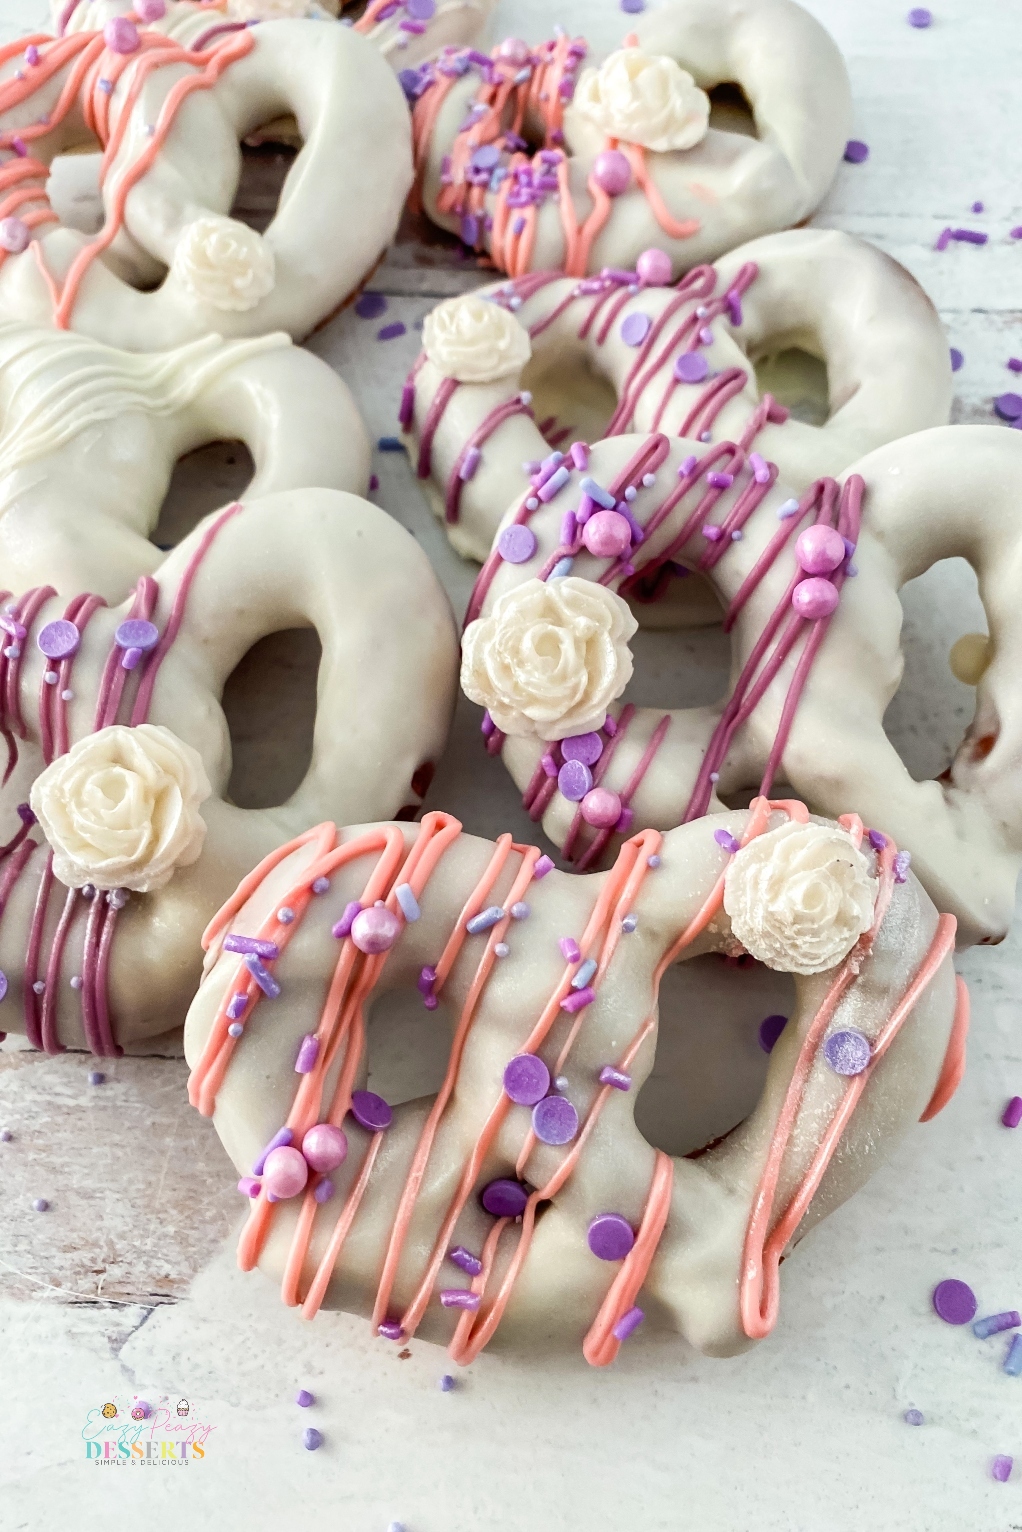 Chocolate dipped pretzels